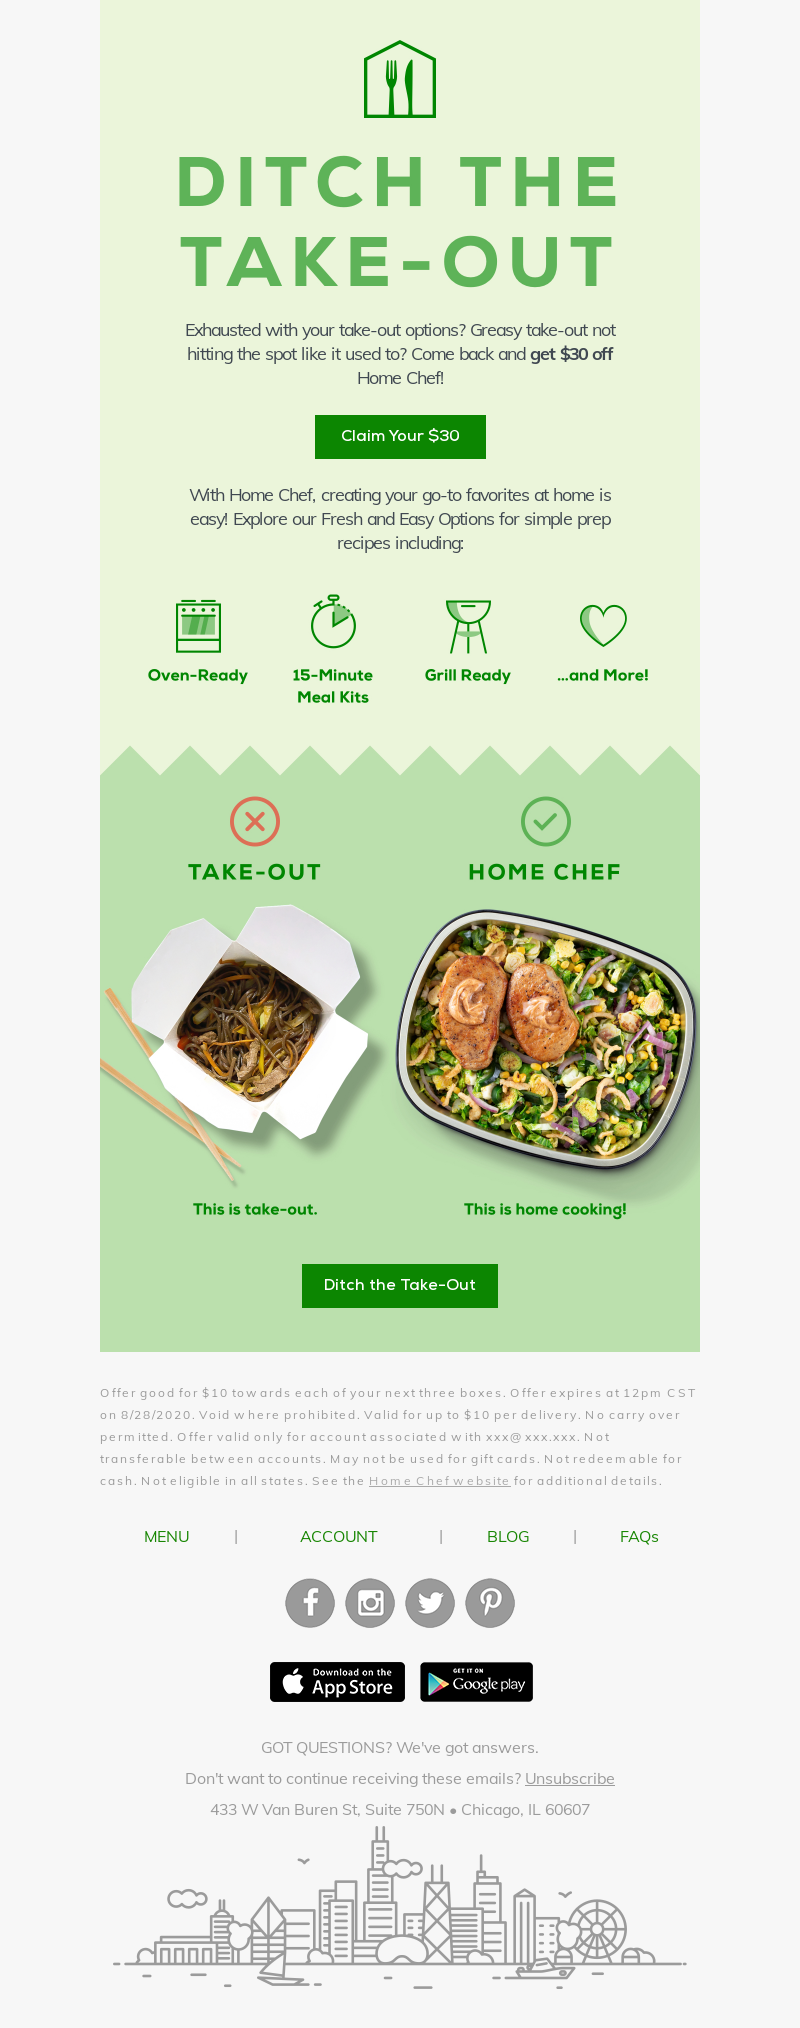 Home Chef - DROP THE TAKE-OUT MENU! 📖 Convenient cooking is here!